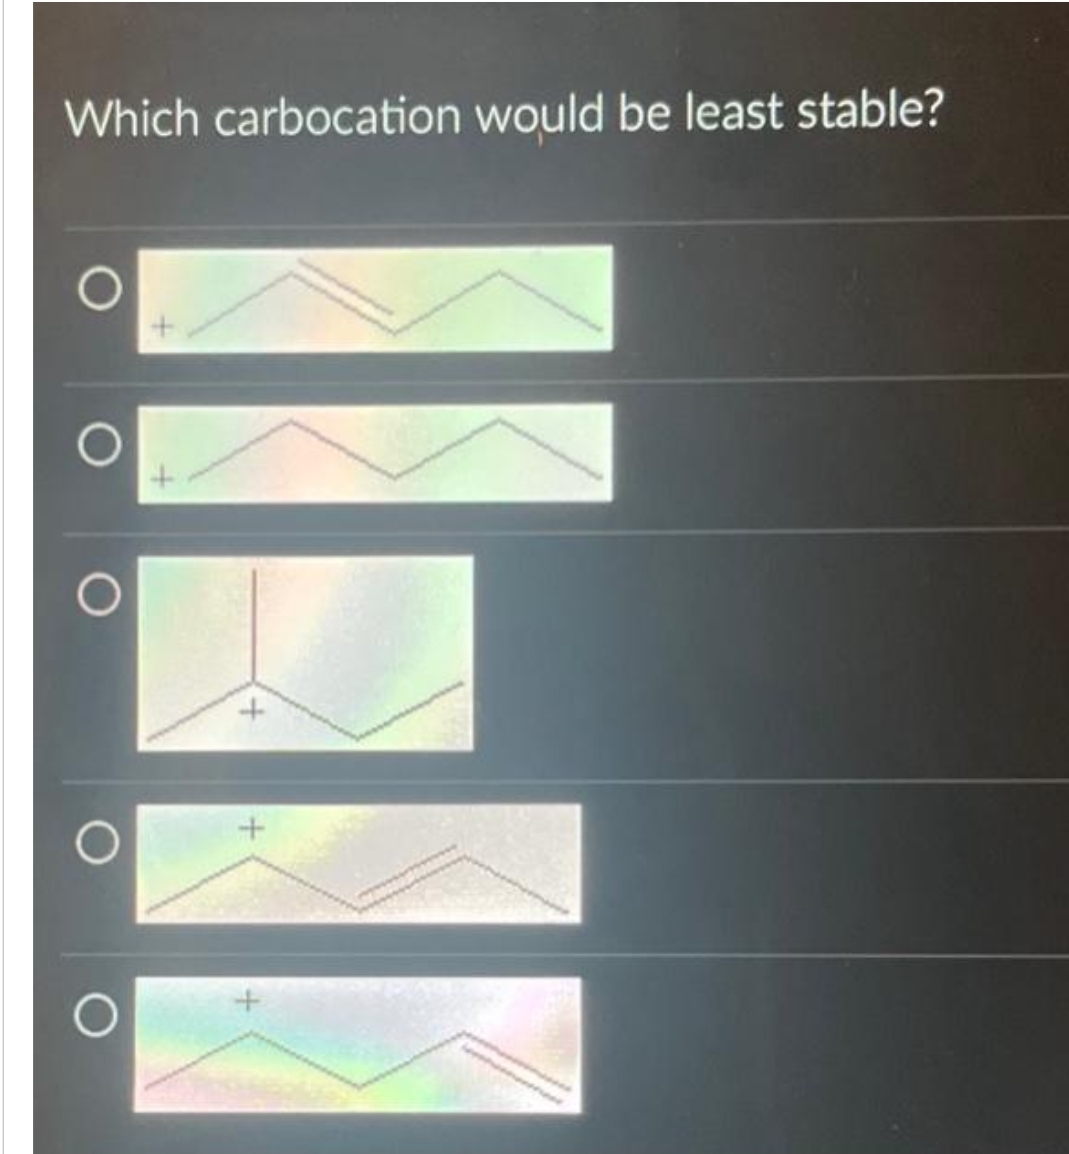 Which carbocation would be least stable?